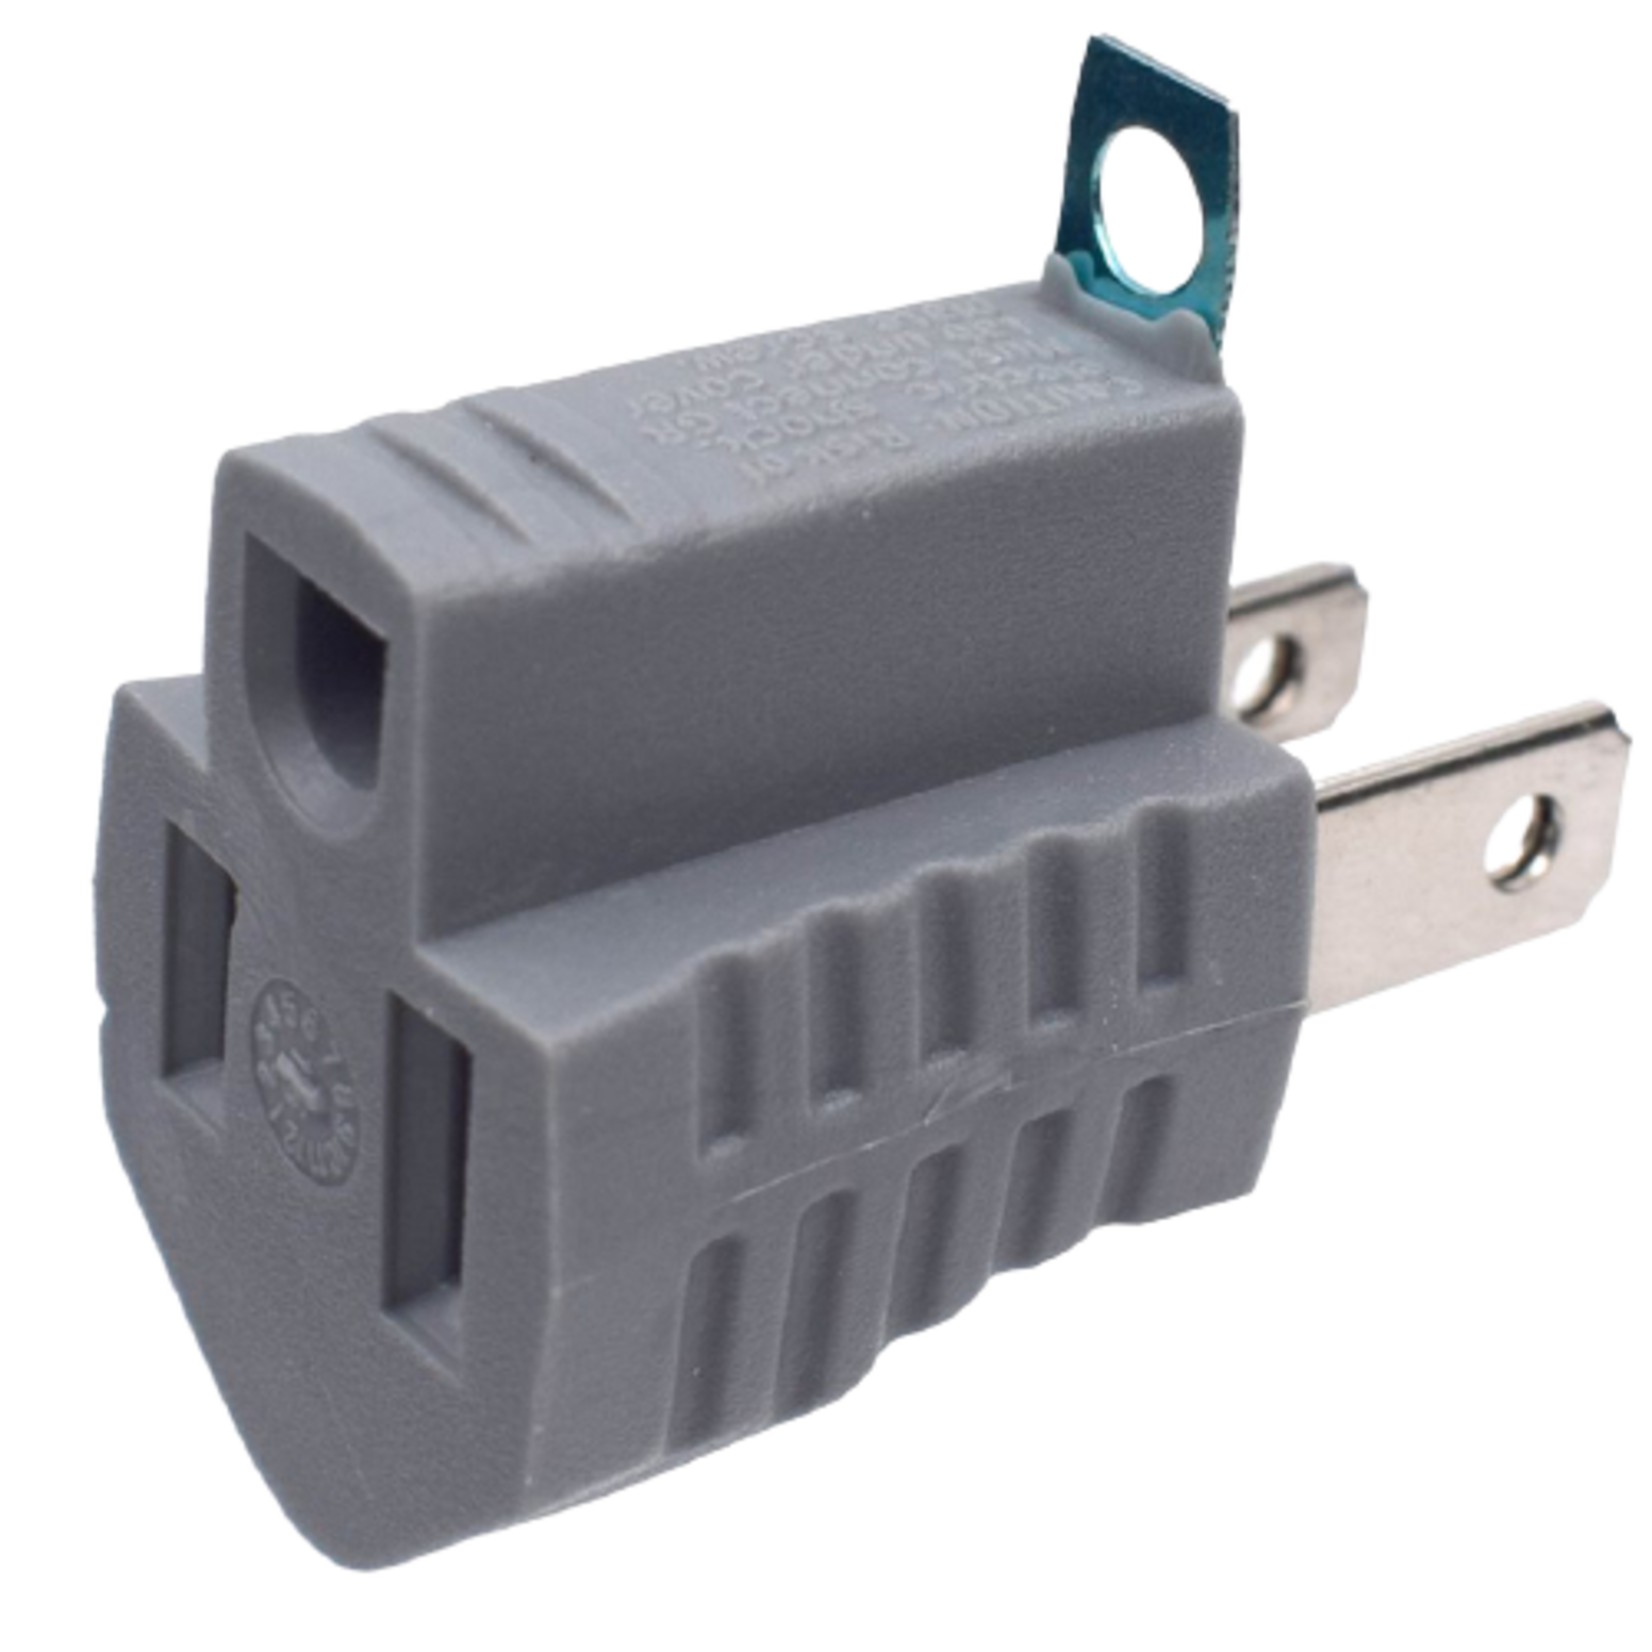 GROUNDED ADAPTER 2 TO 3 PRONG